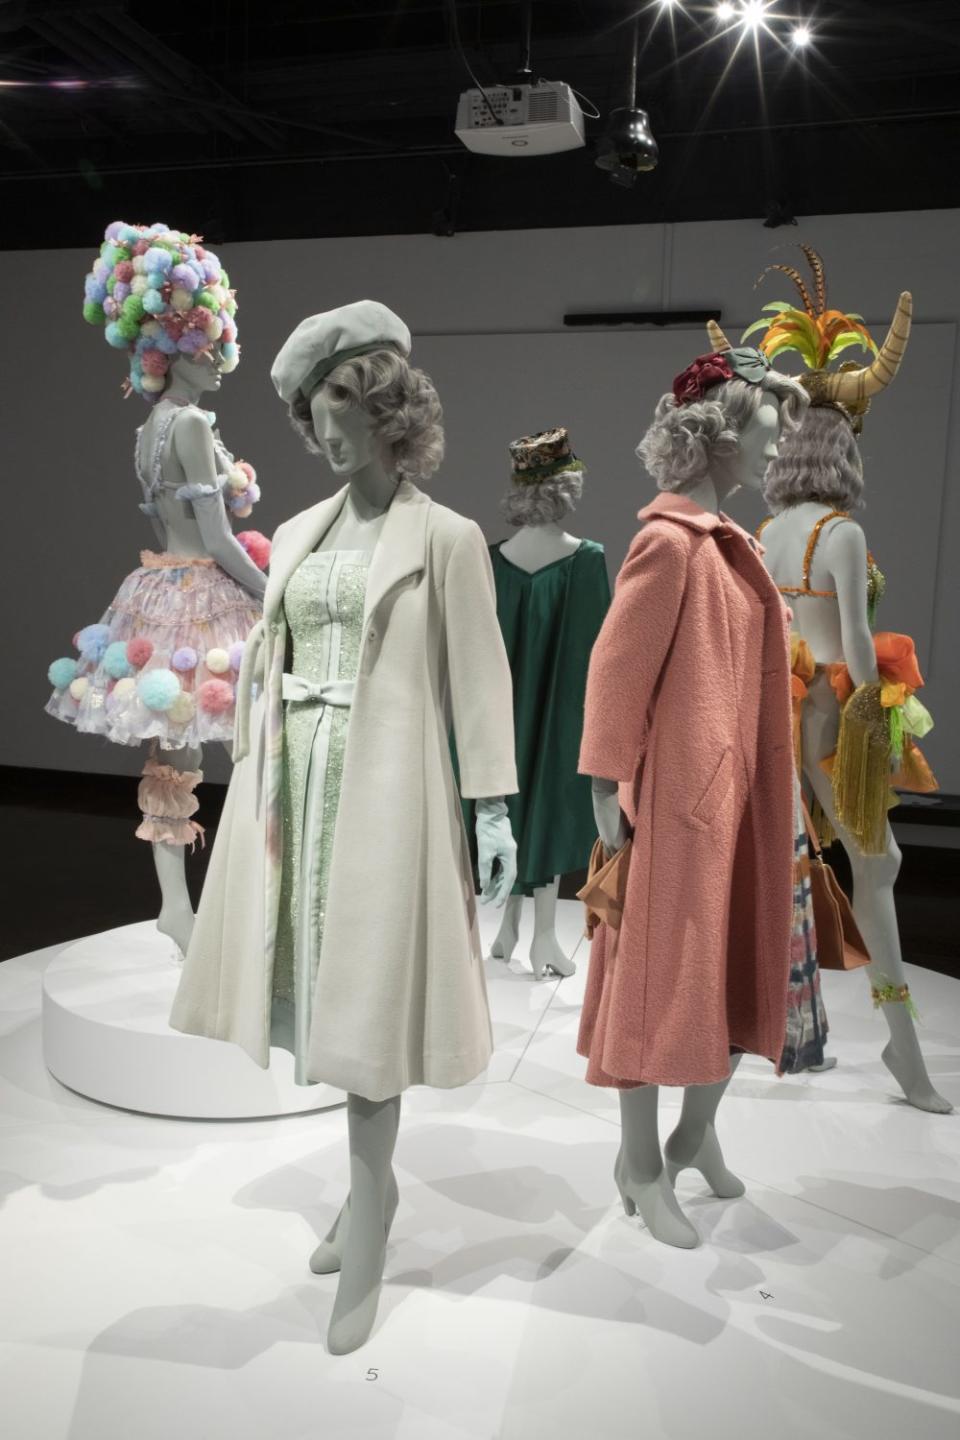 “The Marvelous Mrs. Maisel” costumes by Donna Zakowska. These costumes can be seen in the “Art of Costume Design in Television” exhibition at the FIDM Museum, Fashion Institute of Design & Merchandising, on Thursday, August 19, 2022 in Los Angeles, CA(photo: Benjamin Shmikler/ABImages)